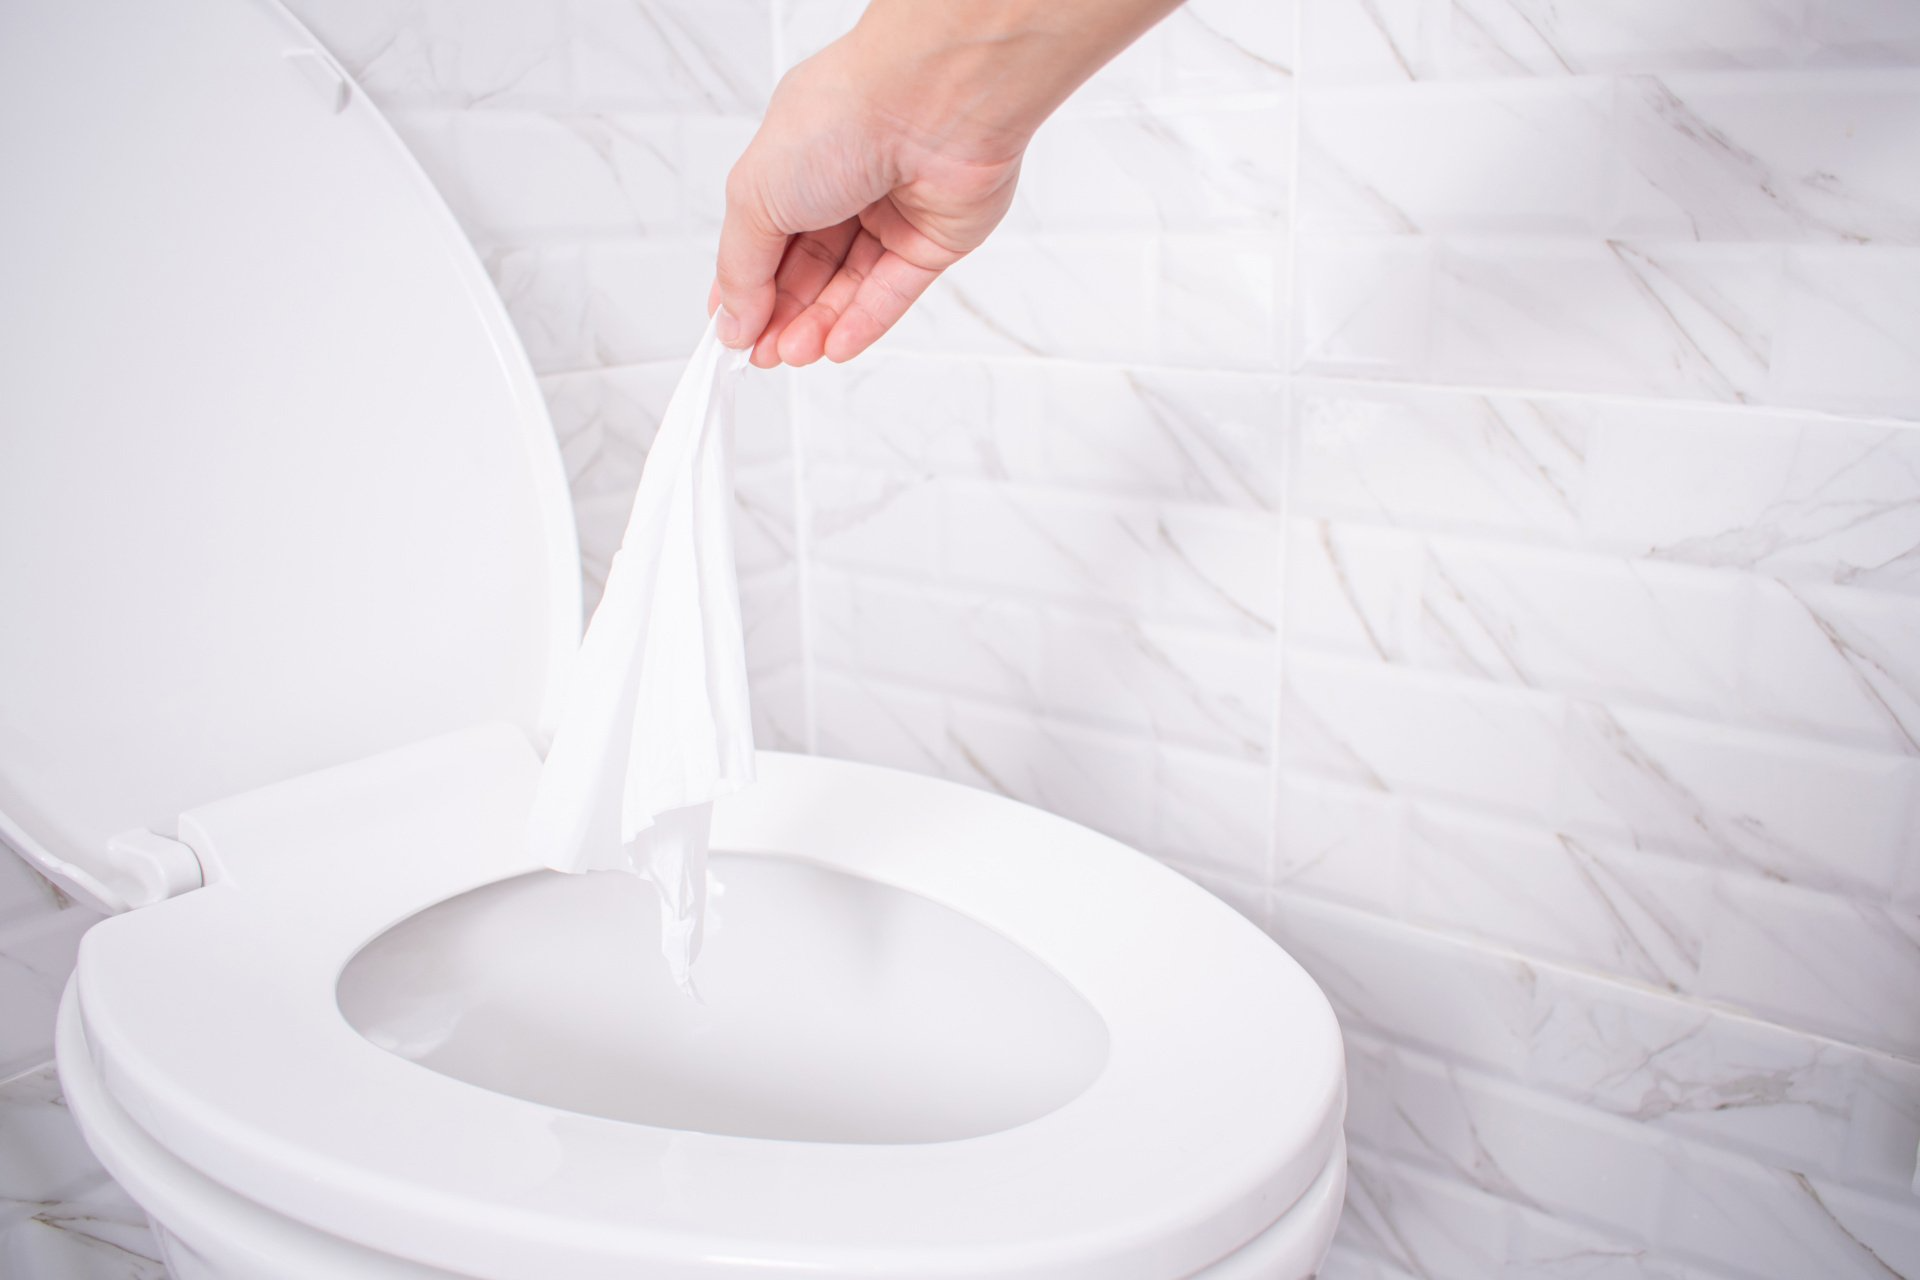 flushing a flushable wipe down the toilet